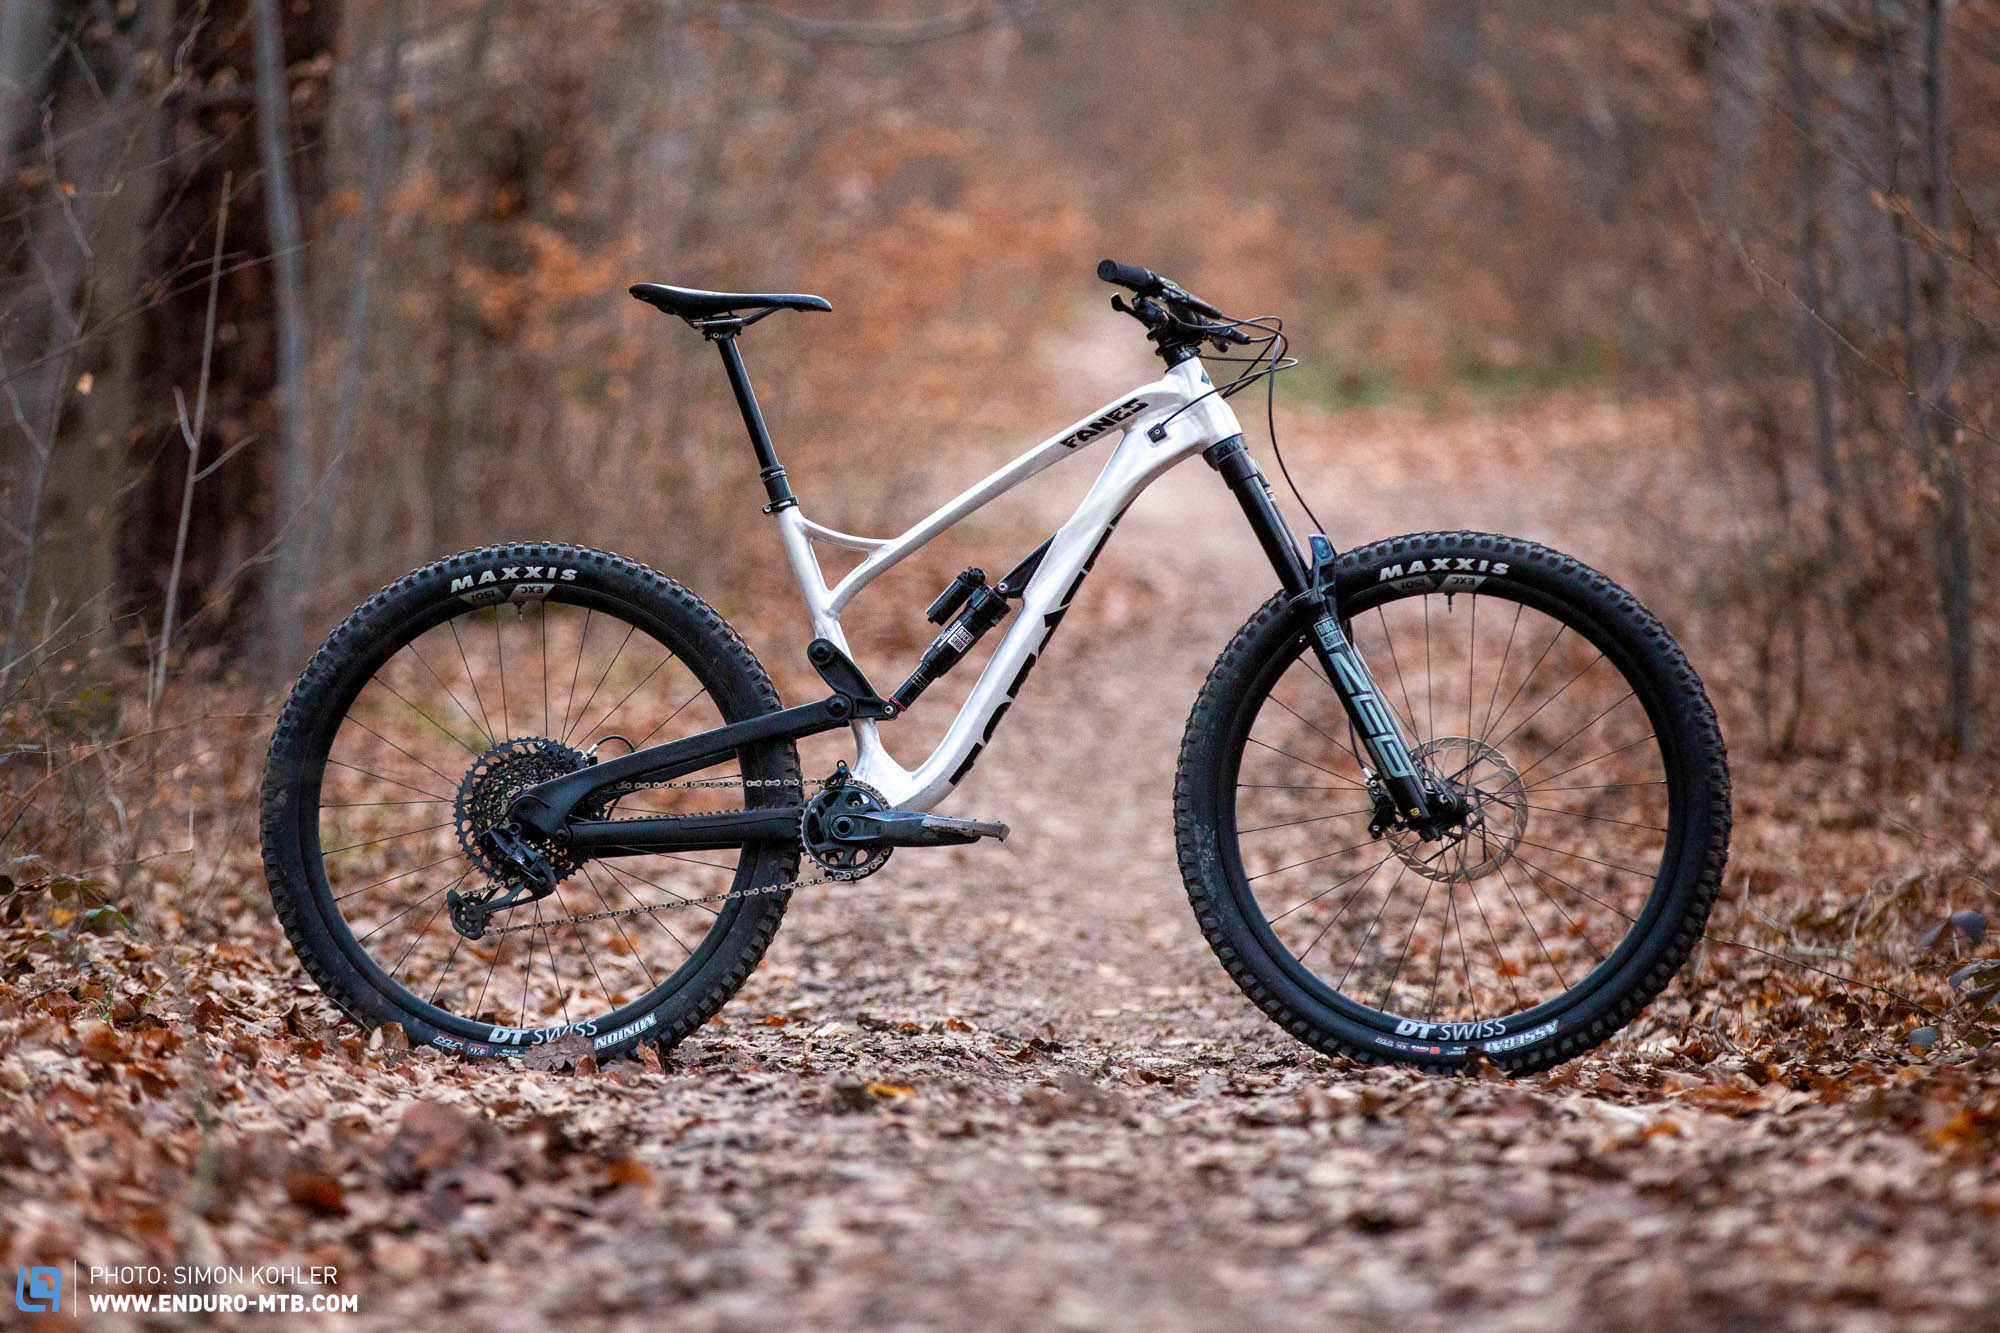 Alutech Fanes 29 Custom in review – A distinctive alloy bruiser from Germany